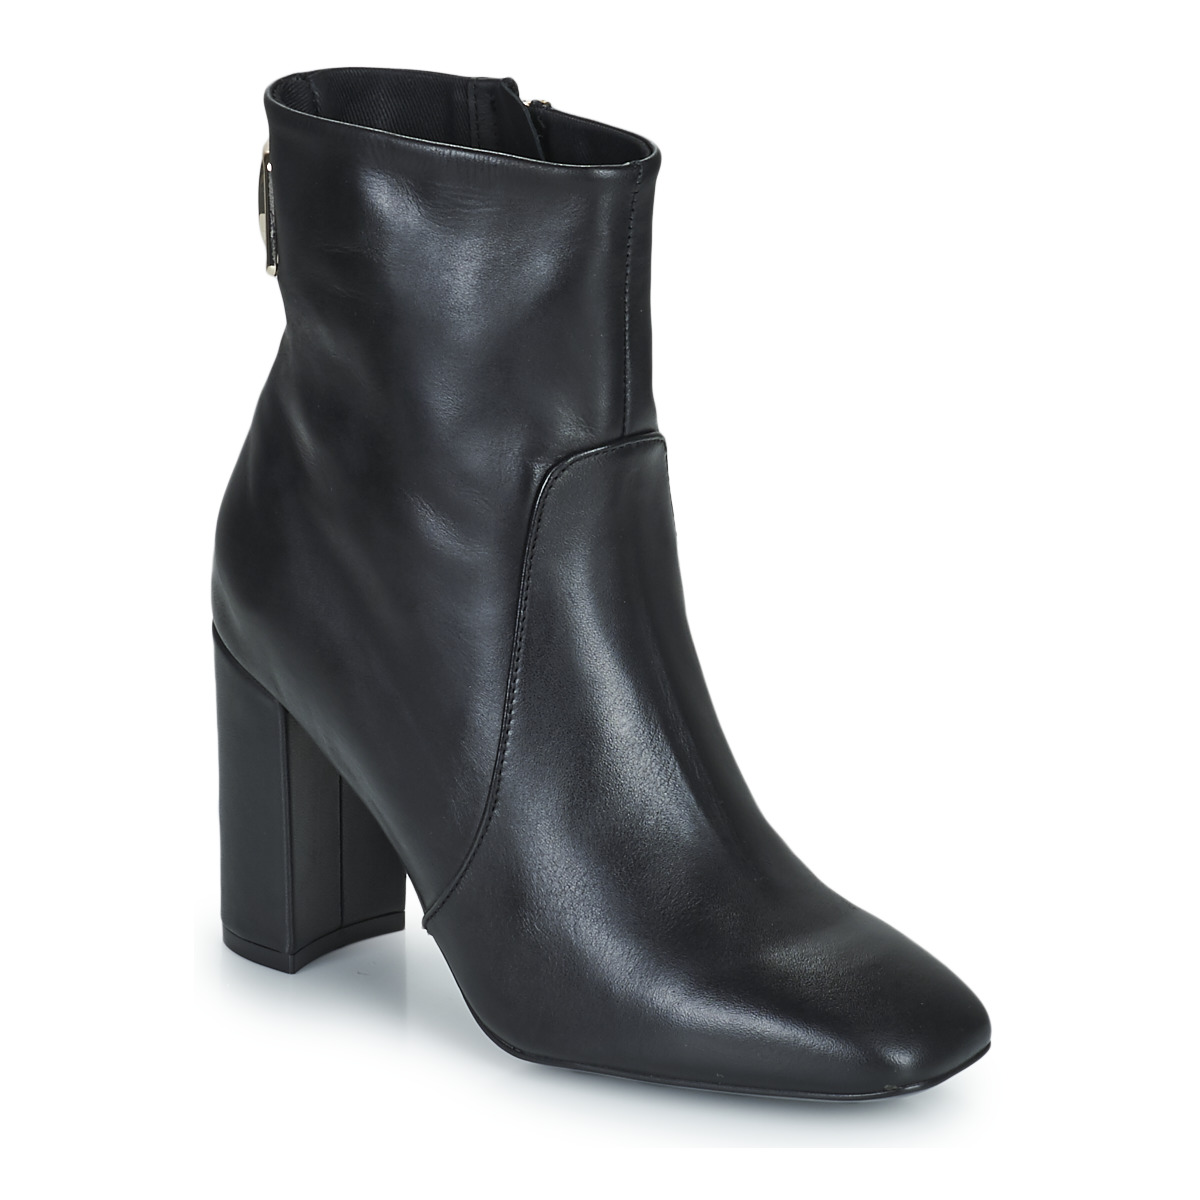 Sapatos Mulher Tommy Hilfiger colour block padded coat Th Hardware High Heel Bootie Preto